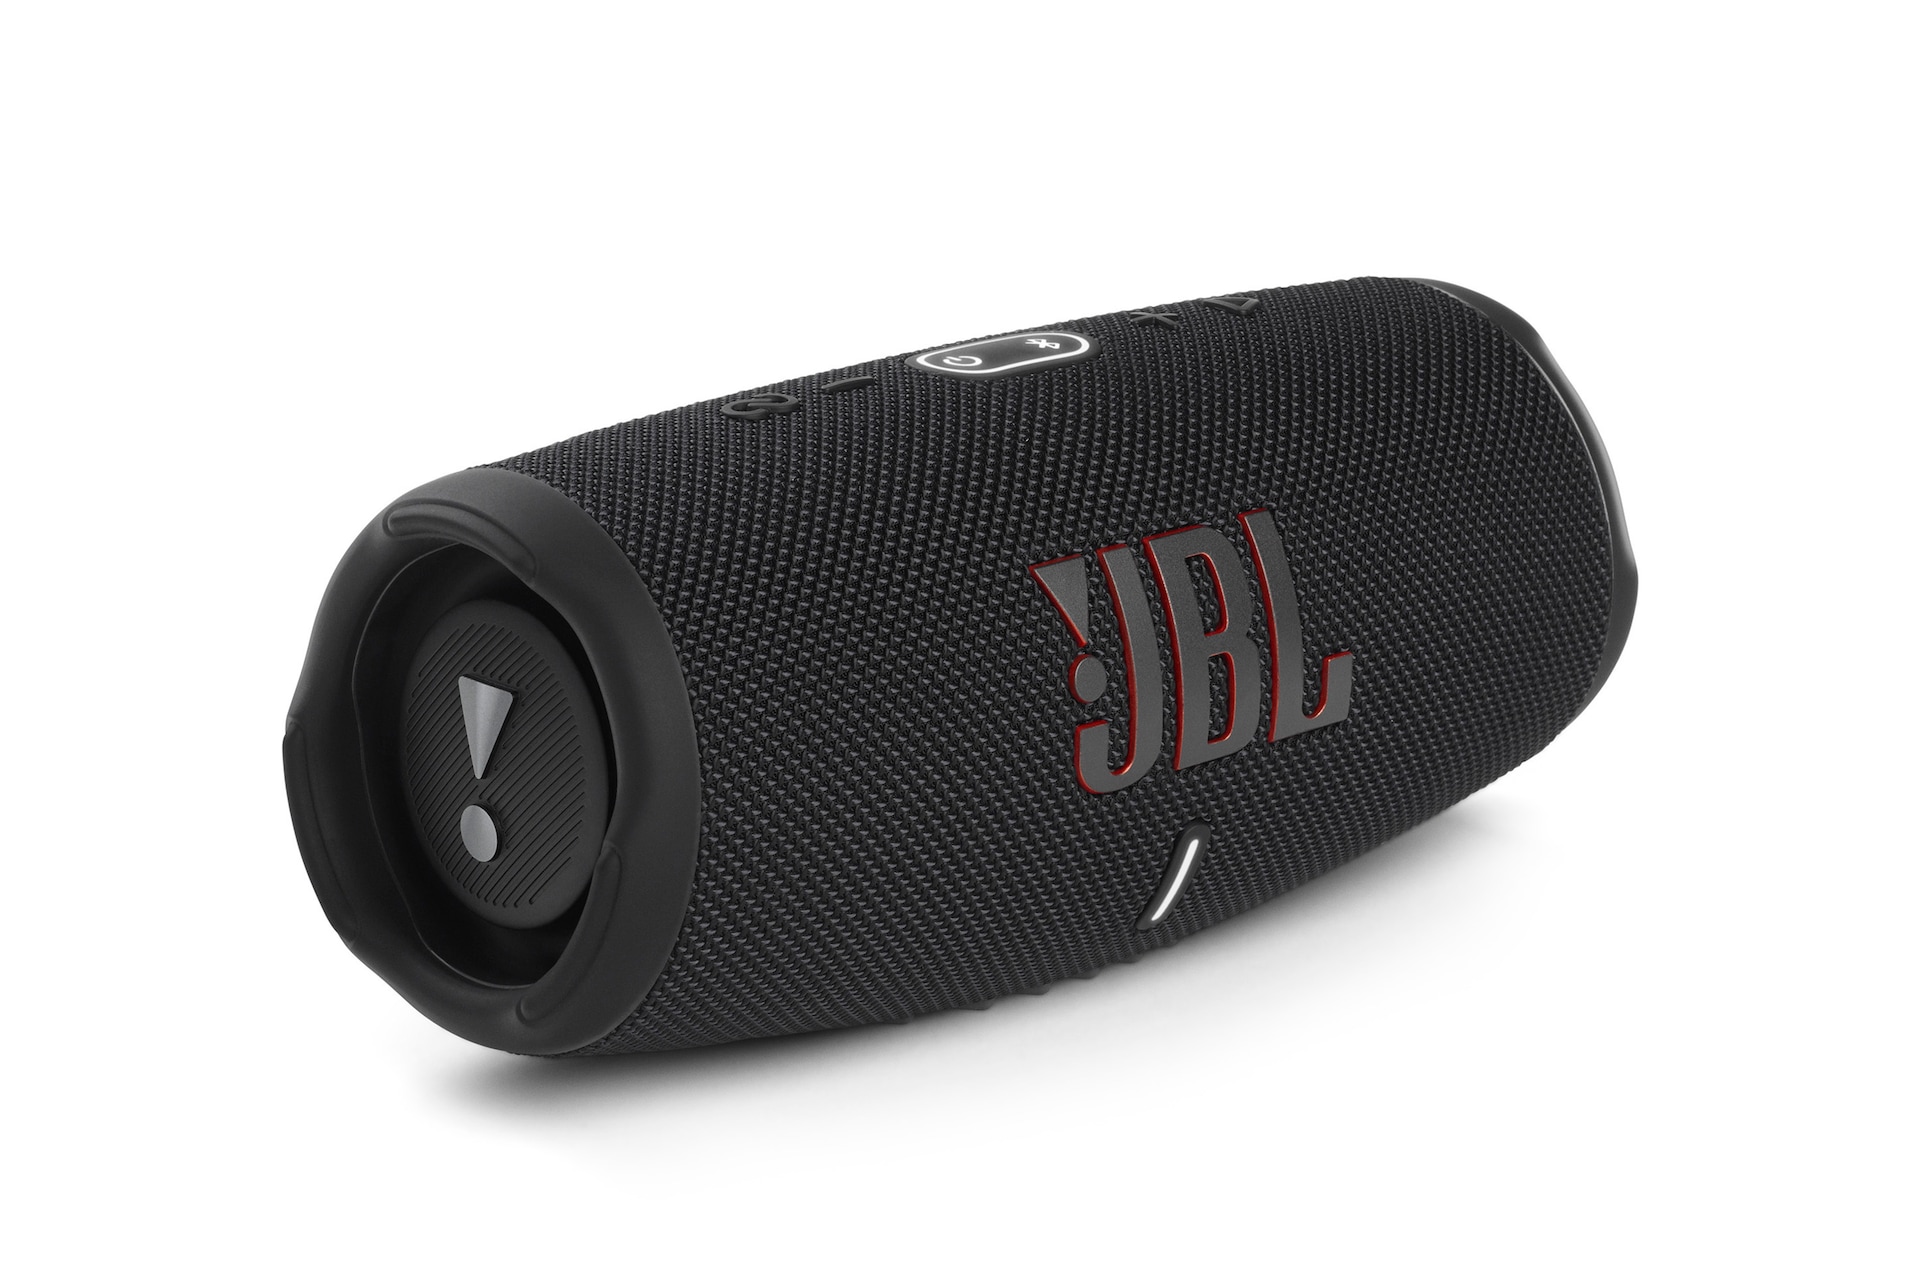 JBL Charge 6: Expected Release Date and Specs